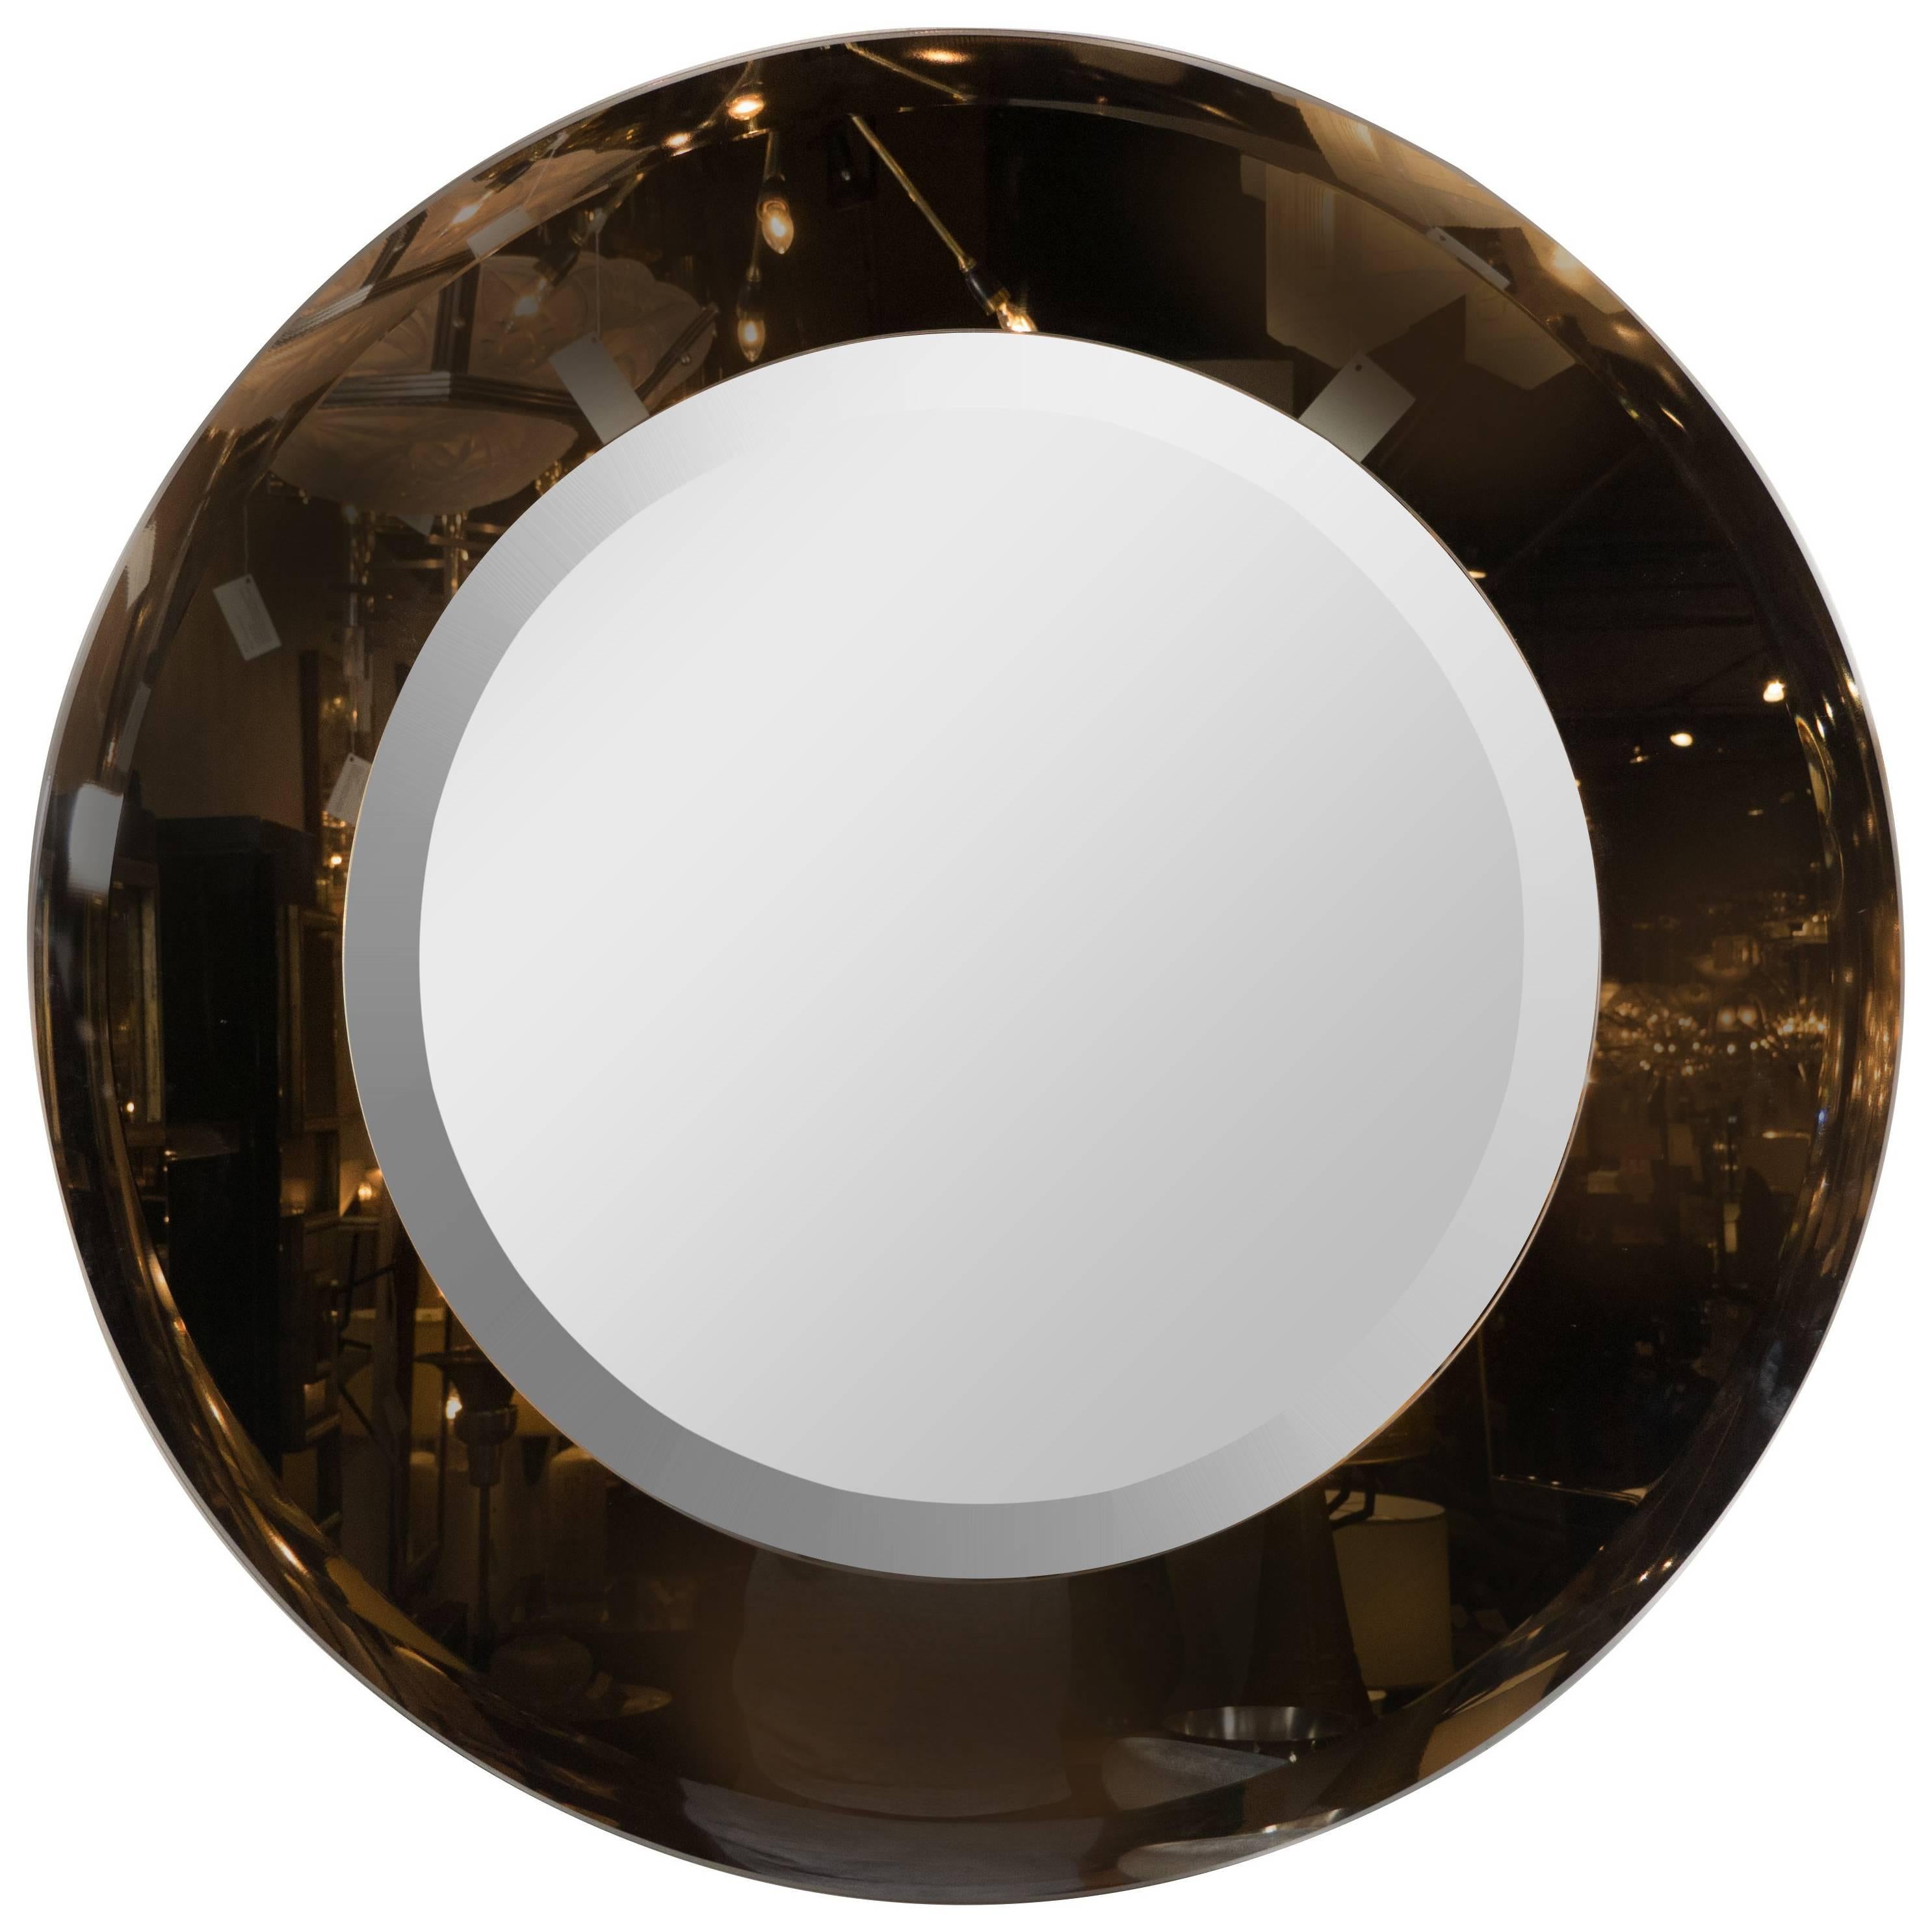 Modernist Smoked and Beveled Circular Mirror in the Manner of Karl Springer